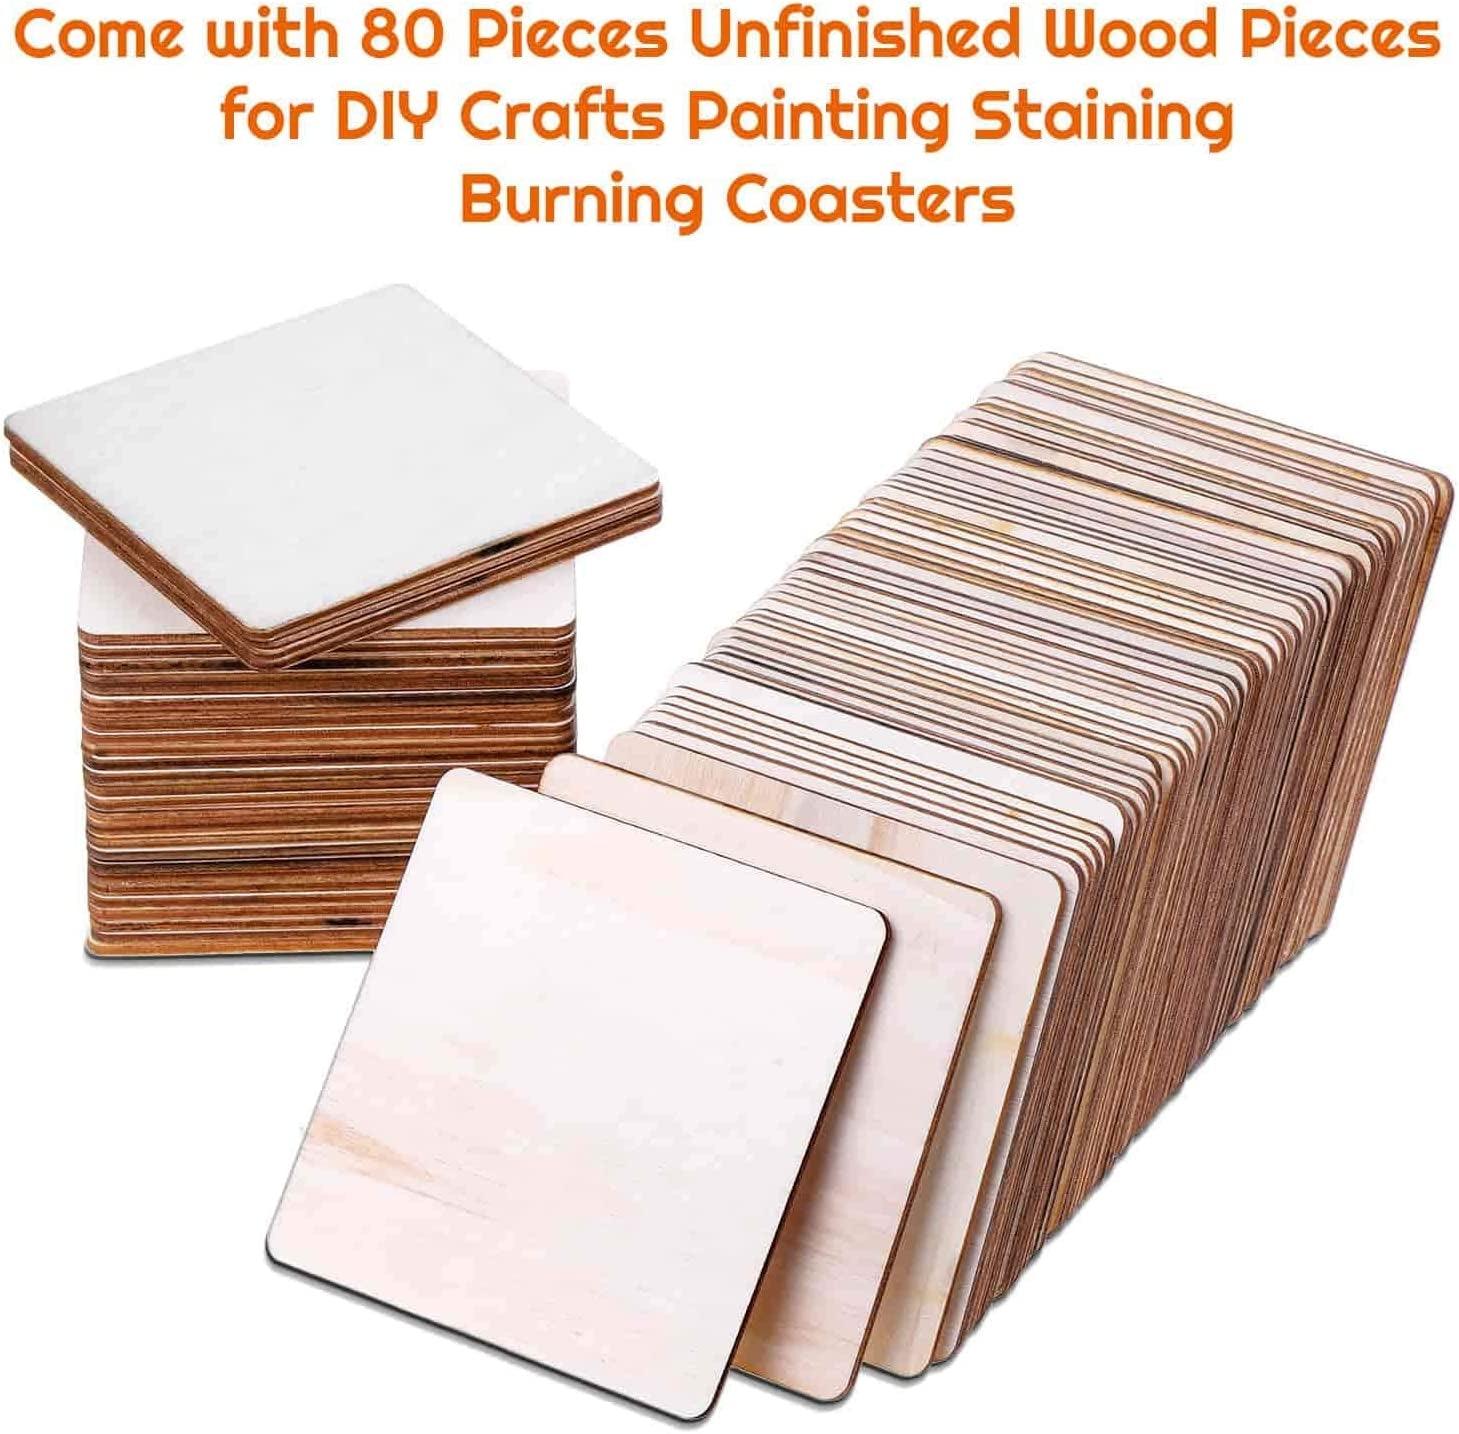 Bright Creations 15 Pack Unfinished Wood Squares Cutout Tiles for Crafts, Engraving, Wood Burning, 3x3 in